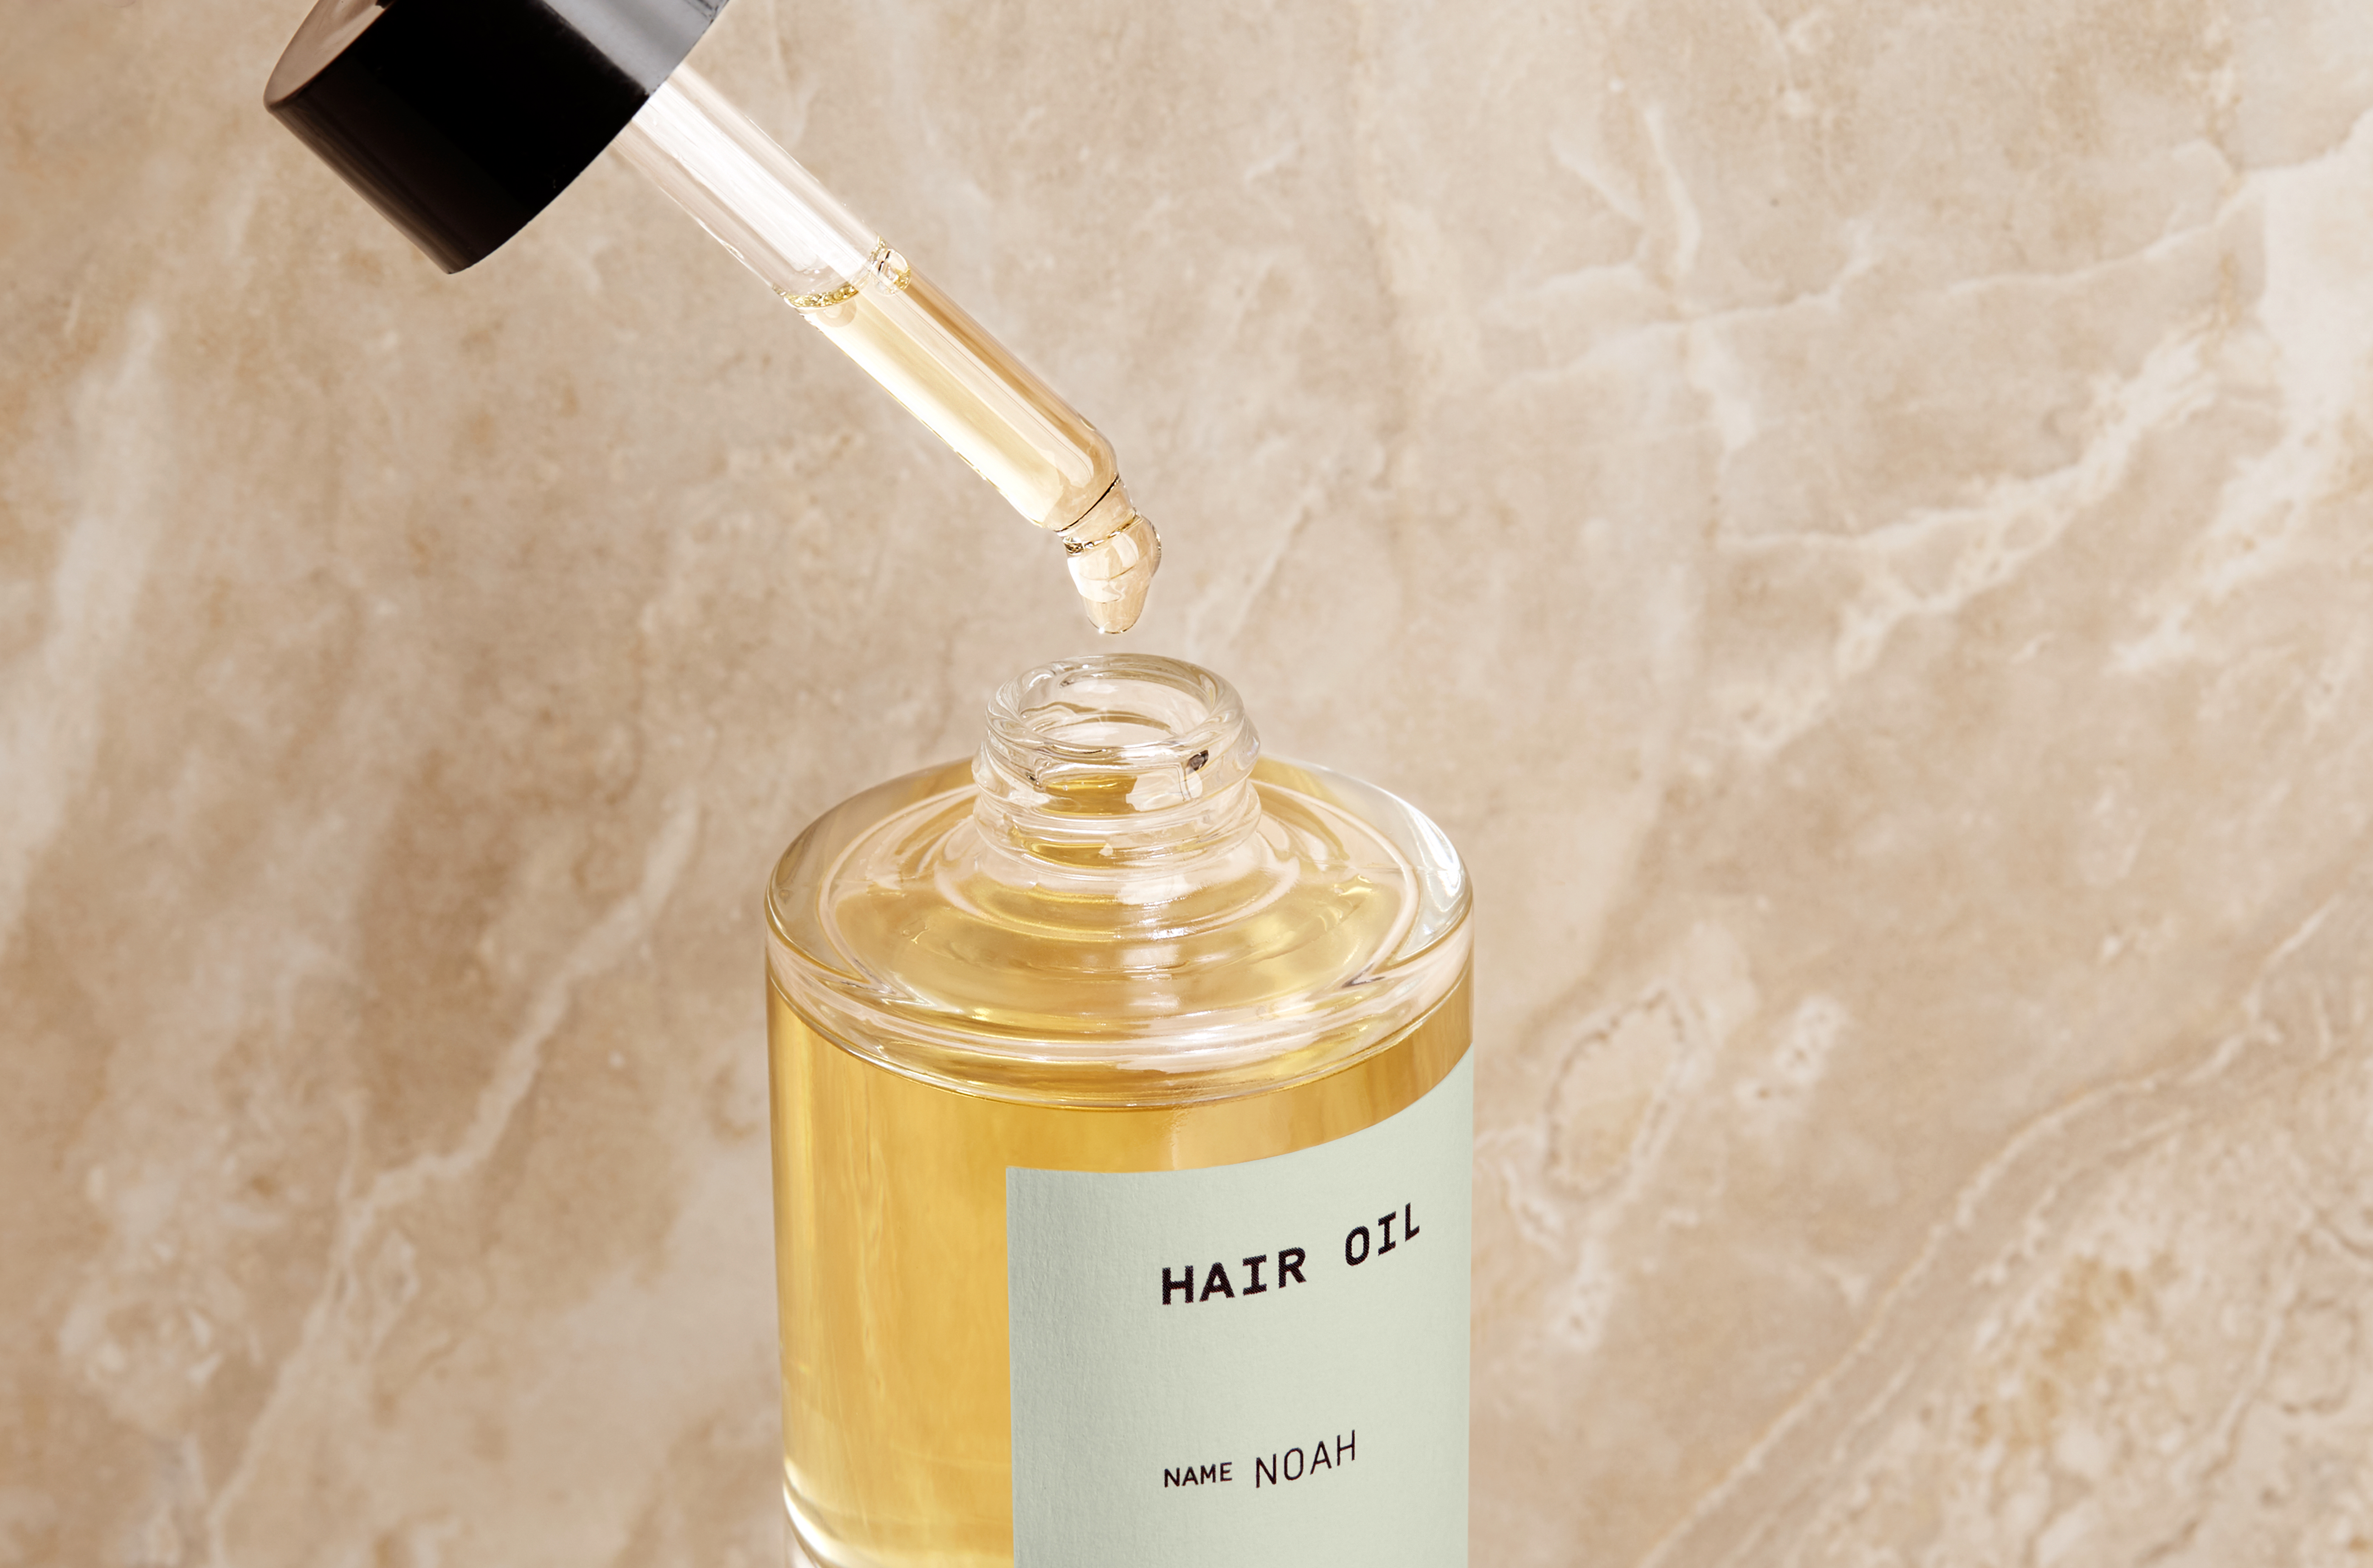 Custom hair oil in front of a marbled blush background